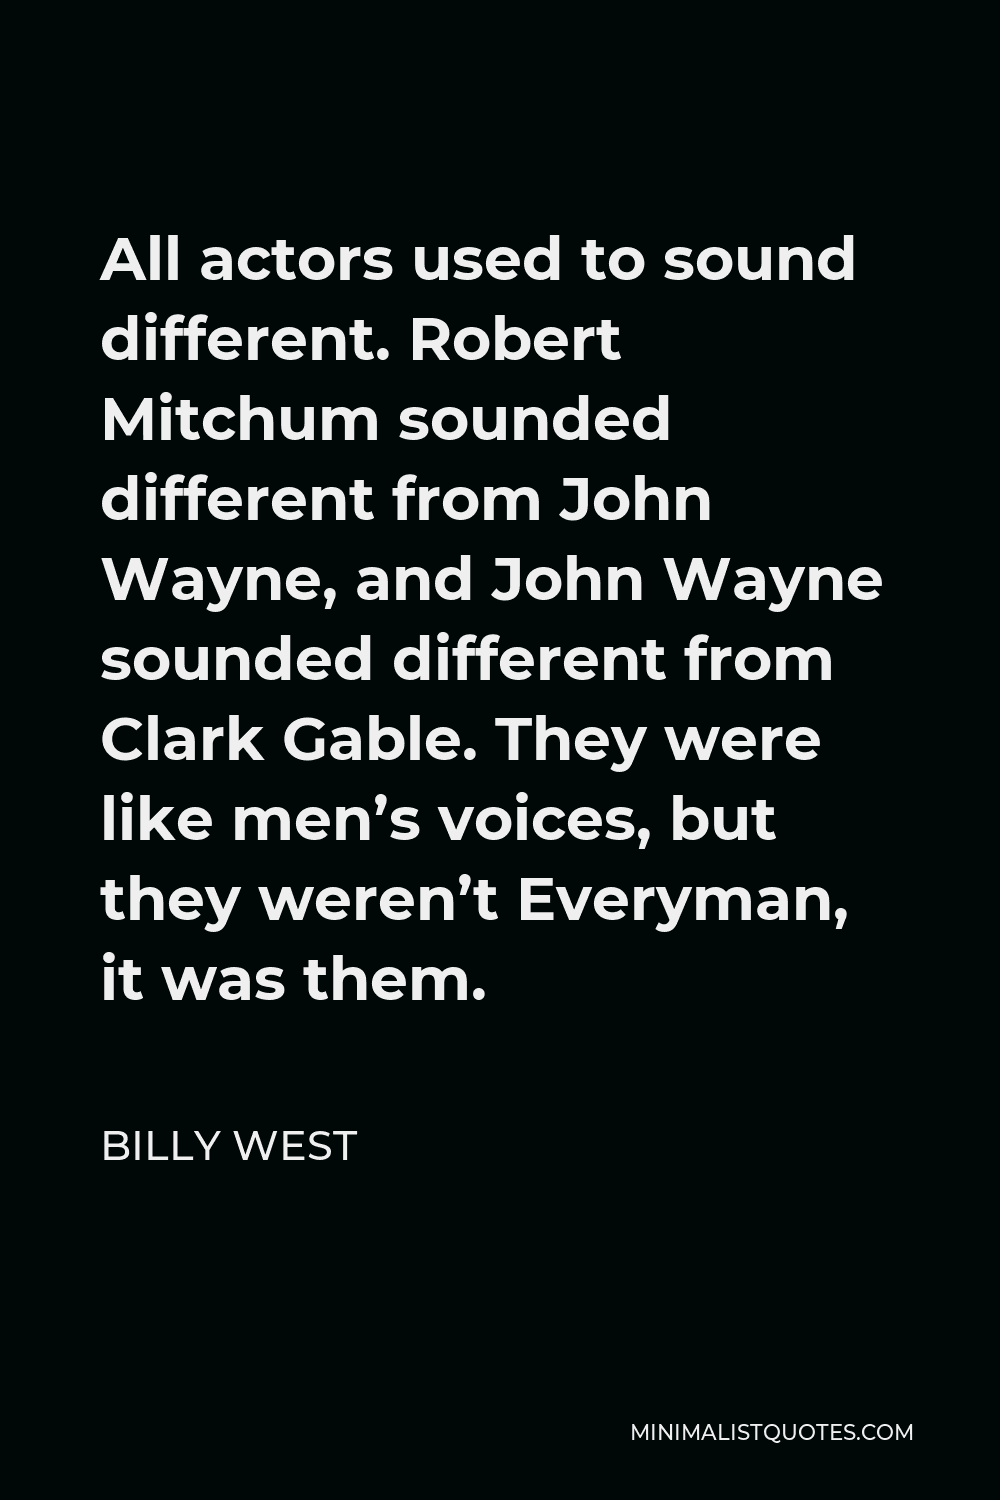 Billy West Quote - All actors used to sound different. Robert Mitchum sounded different from John Wayne, and John Wayne sounded different from Clark Gable. They were like men’s voices, but they weren’t Everyman, it was them.